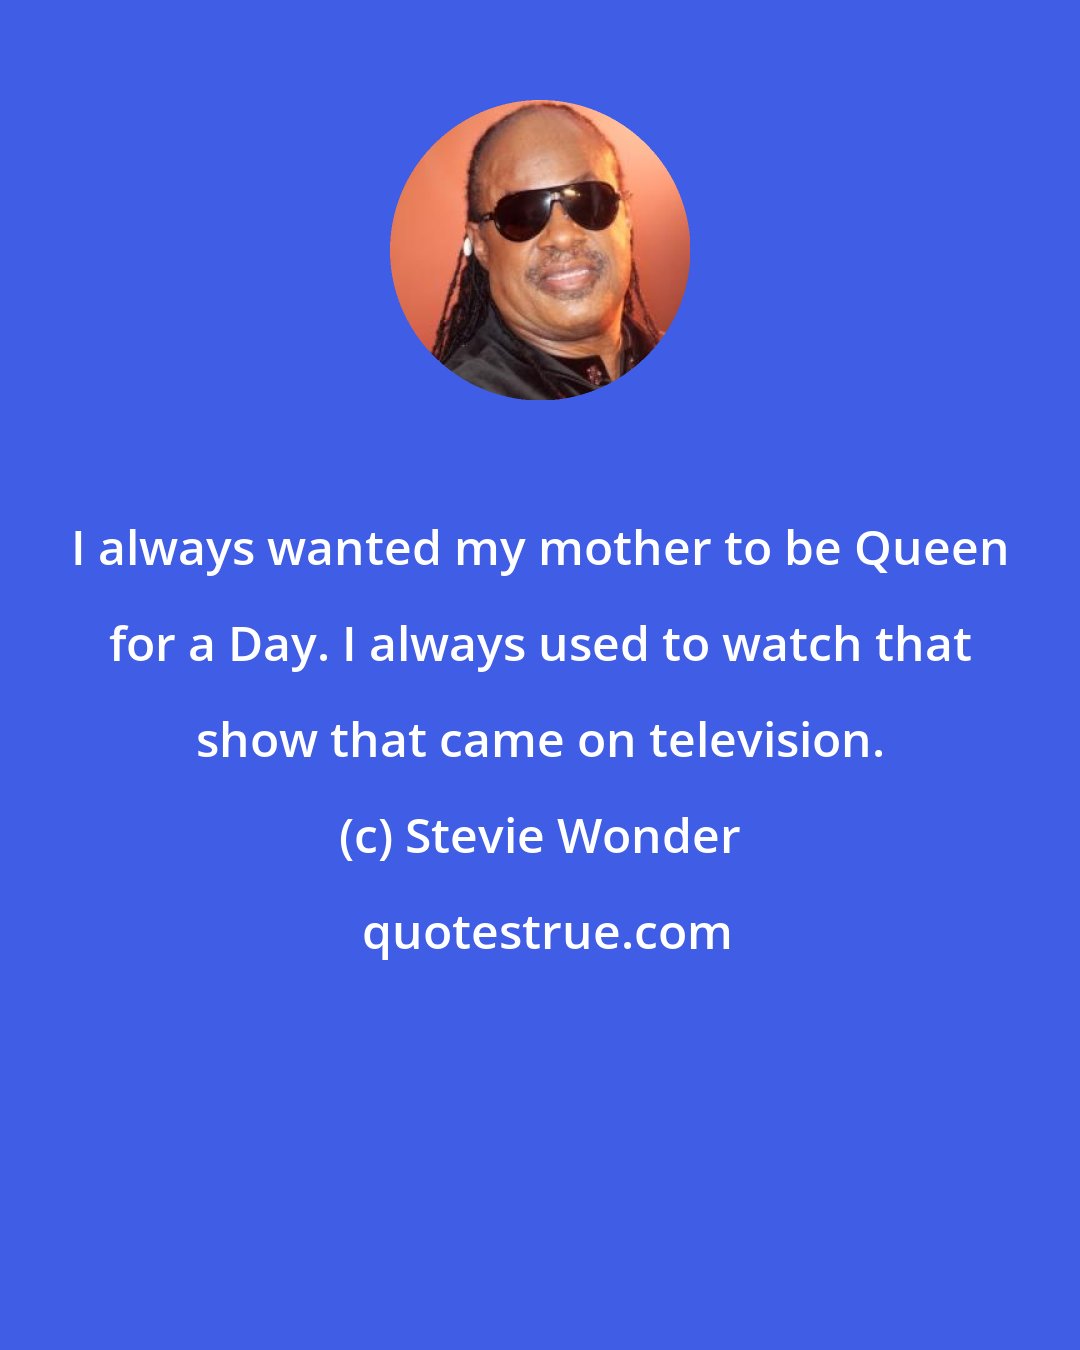 Stevie Wonder: I always wanted my mother to be Queen for a Day. I always used to watch that show that came on television.